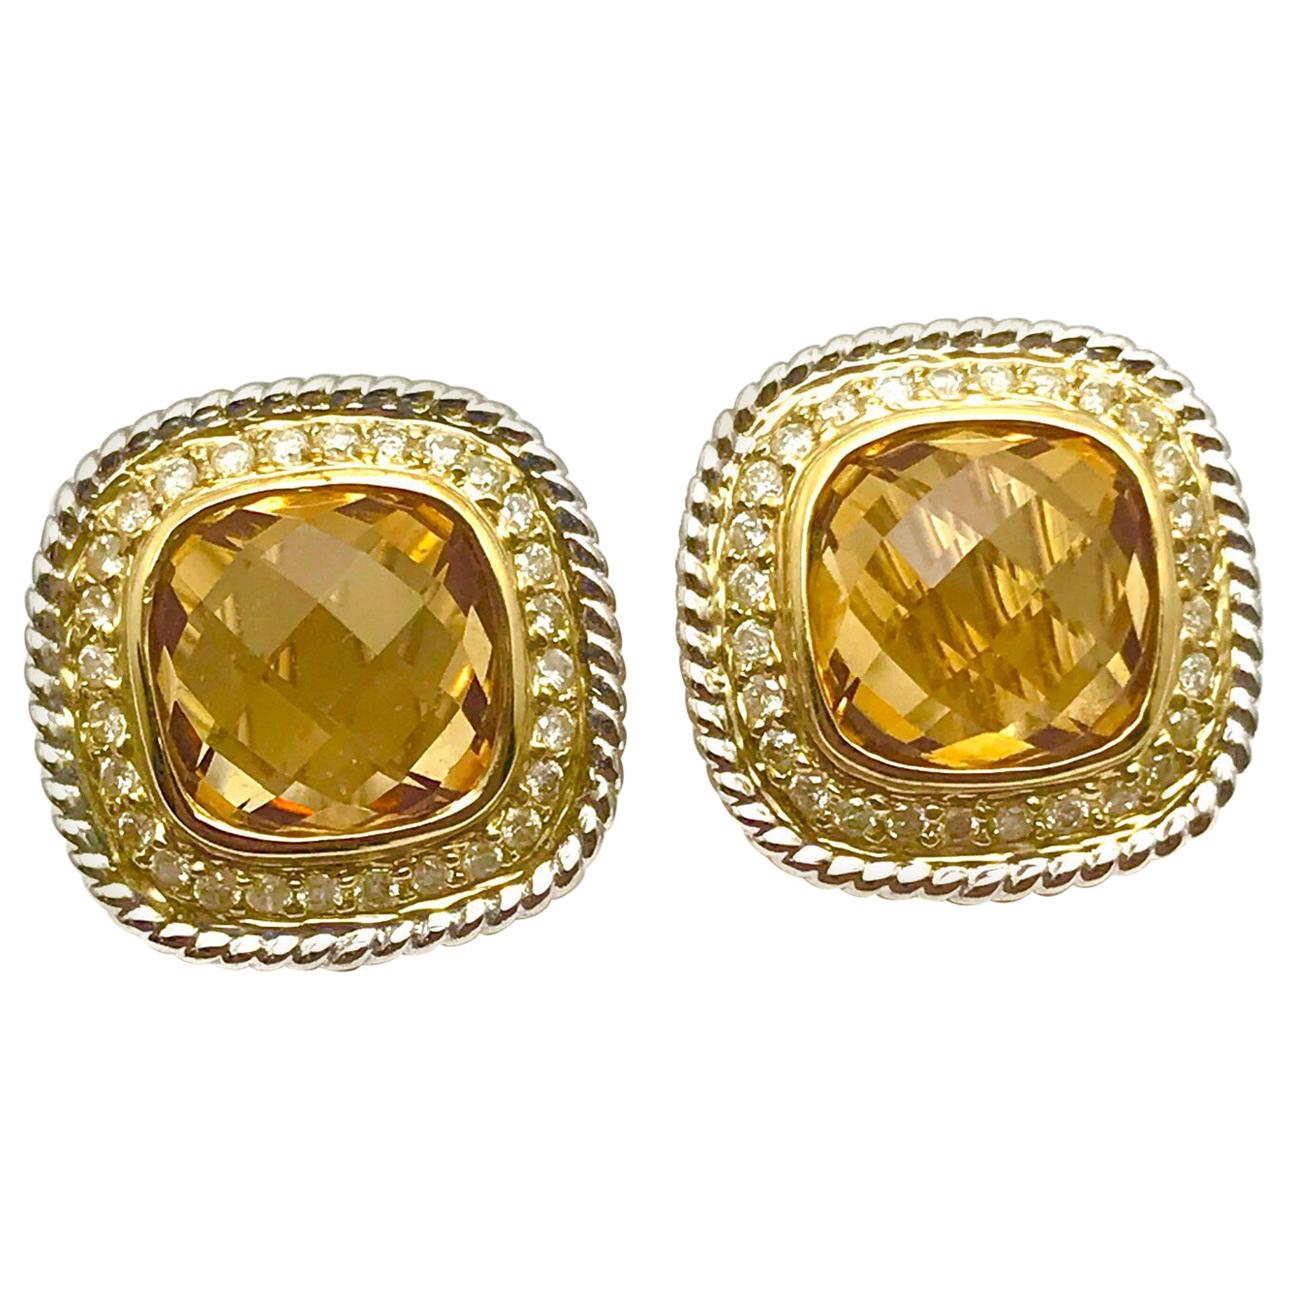 3.00 Carat Citrine and Diamond White and Yellow Gold Clip Earrings